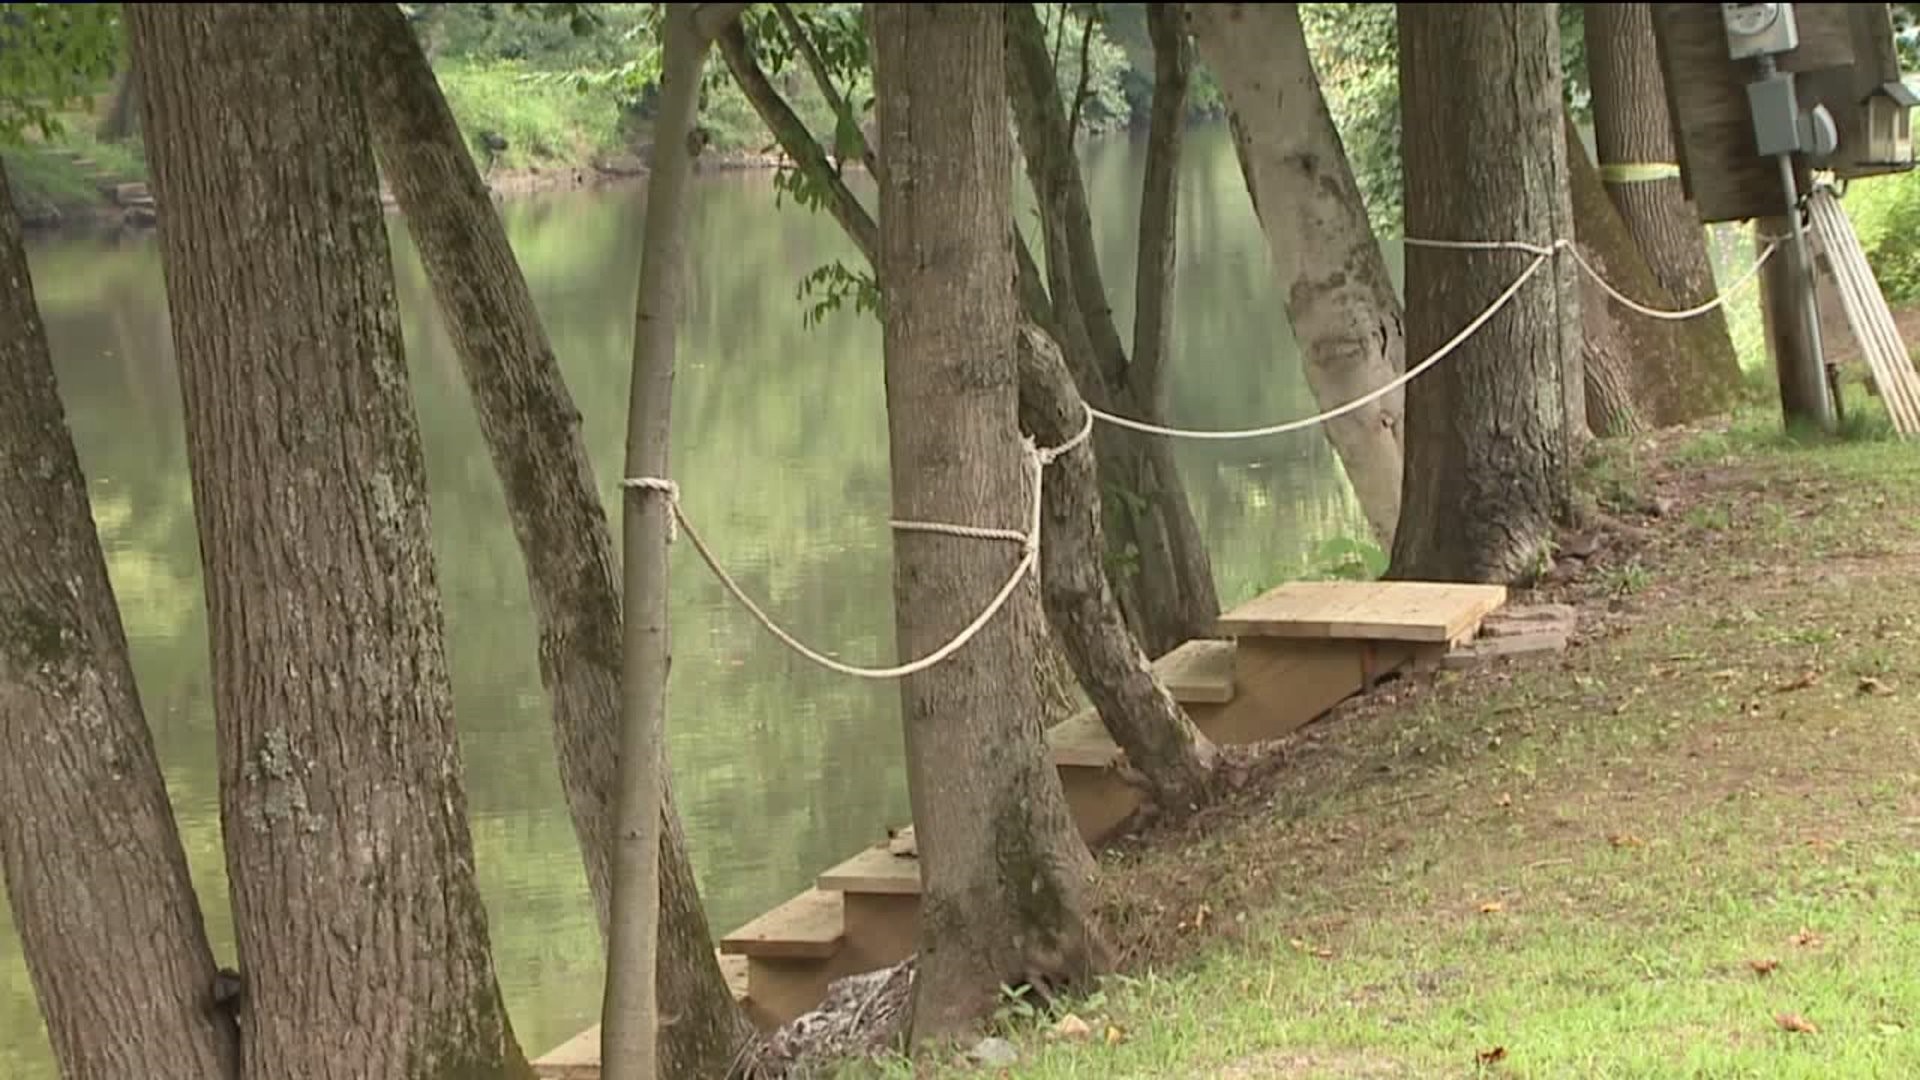 Campers Mourn After Fellow Camper Drowns in Fishing Creek